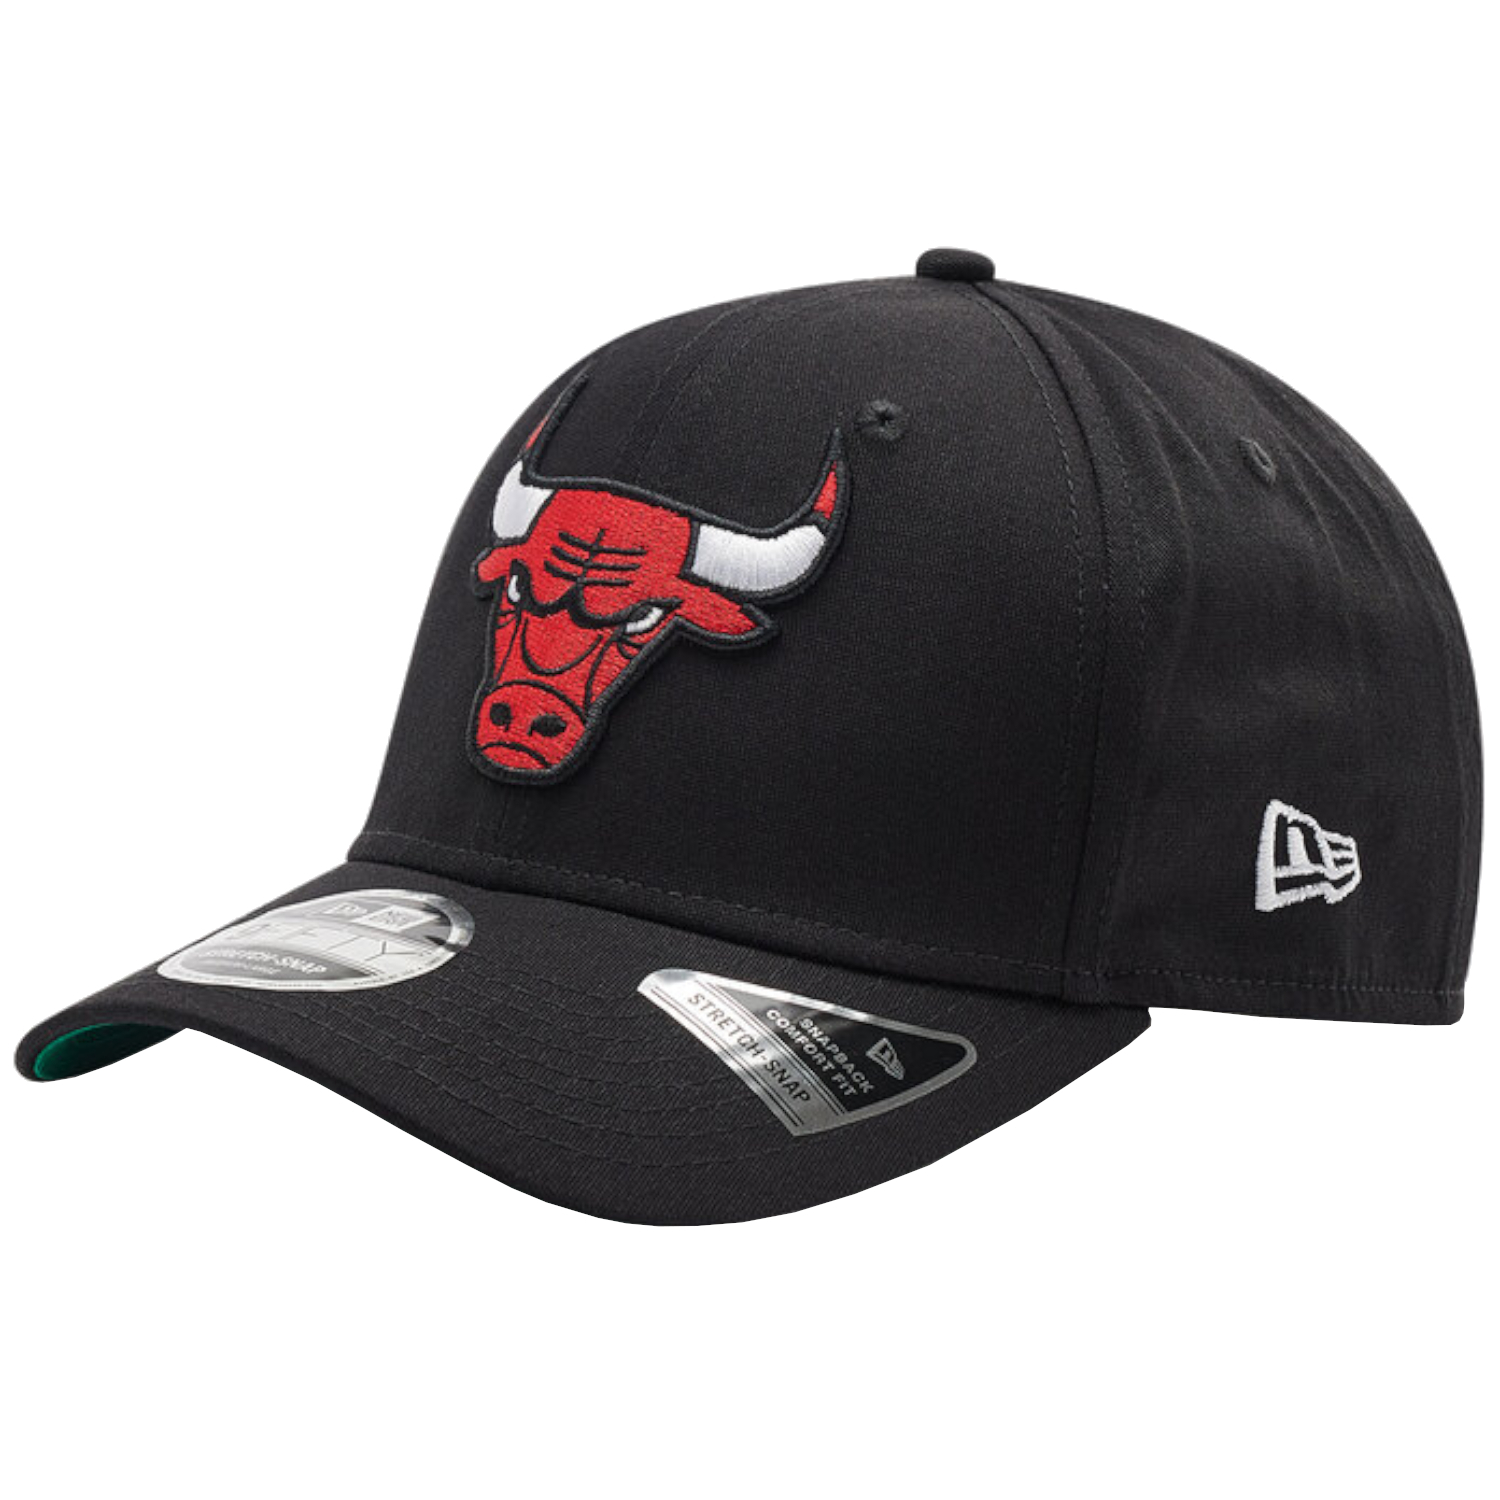 NEW ERA 9FIFTY CHICAGO BULLS NBA STRETCH SNAP CAP 60240588 Velikost: ONE SIZE